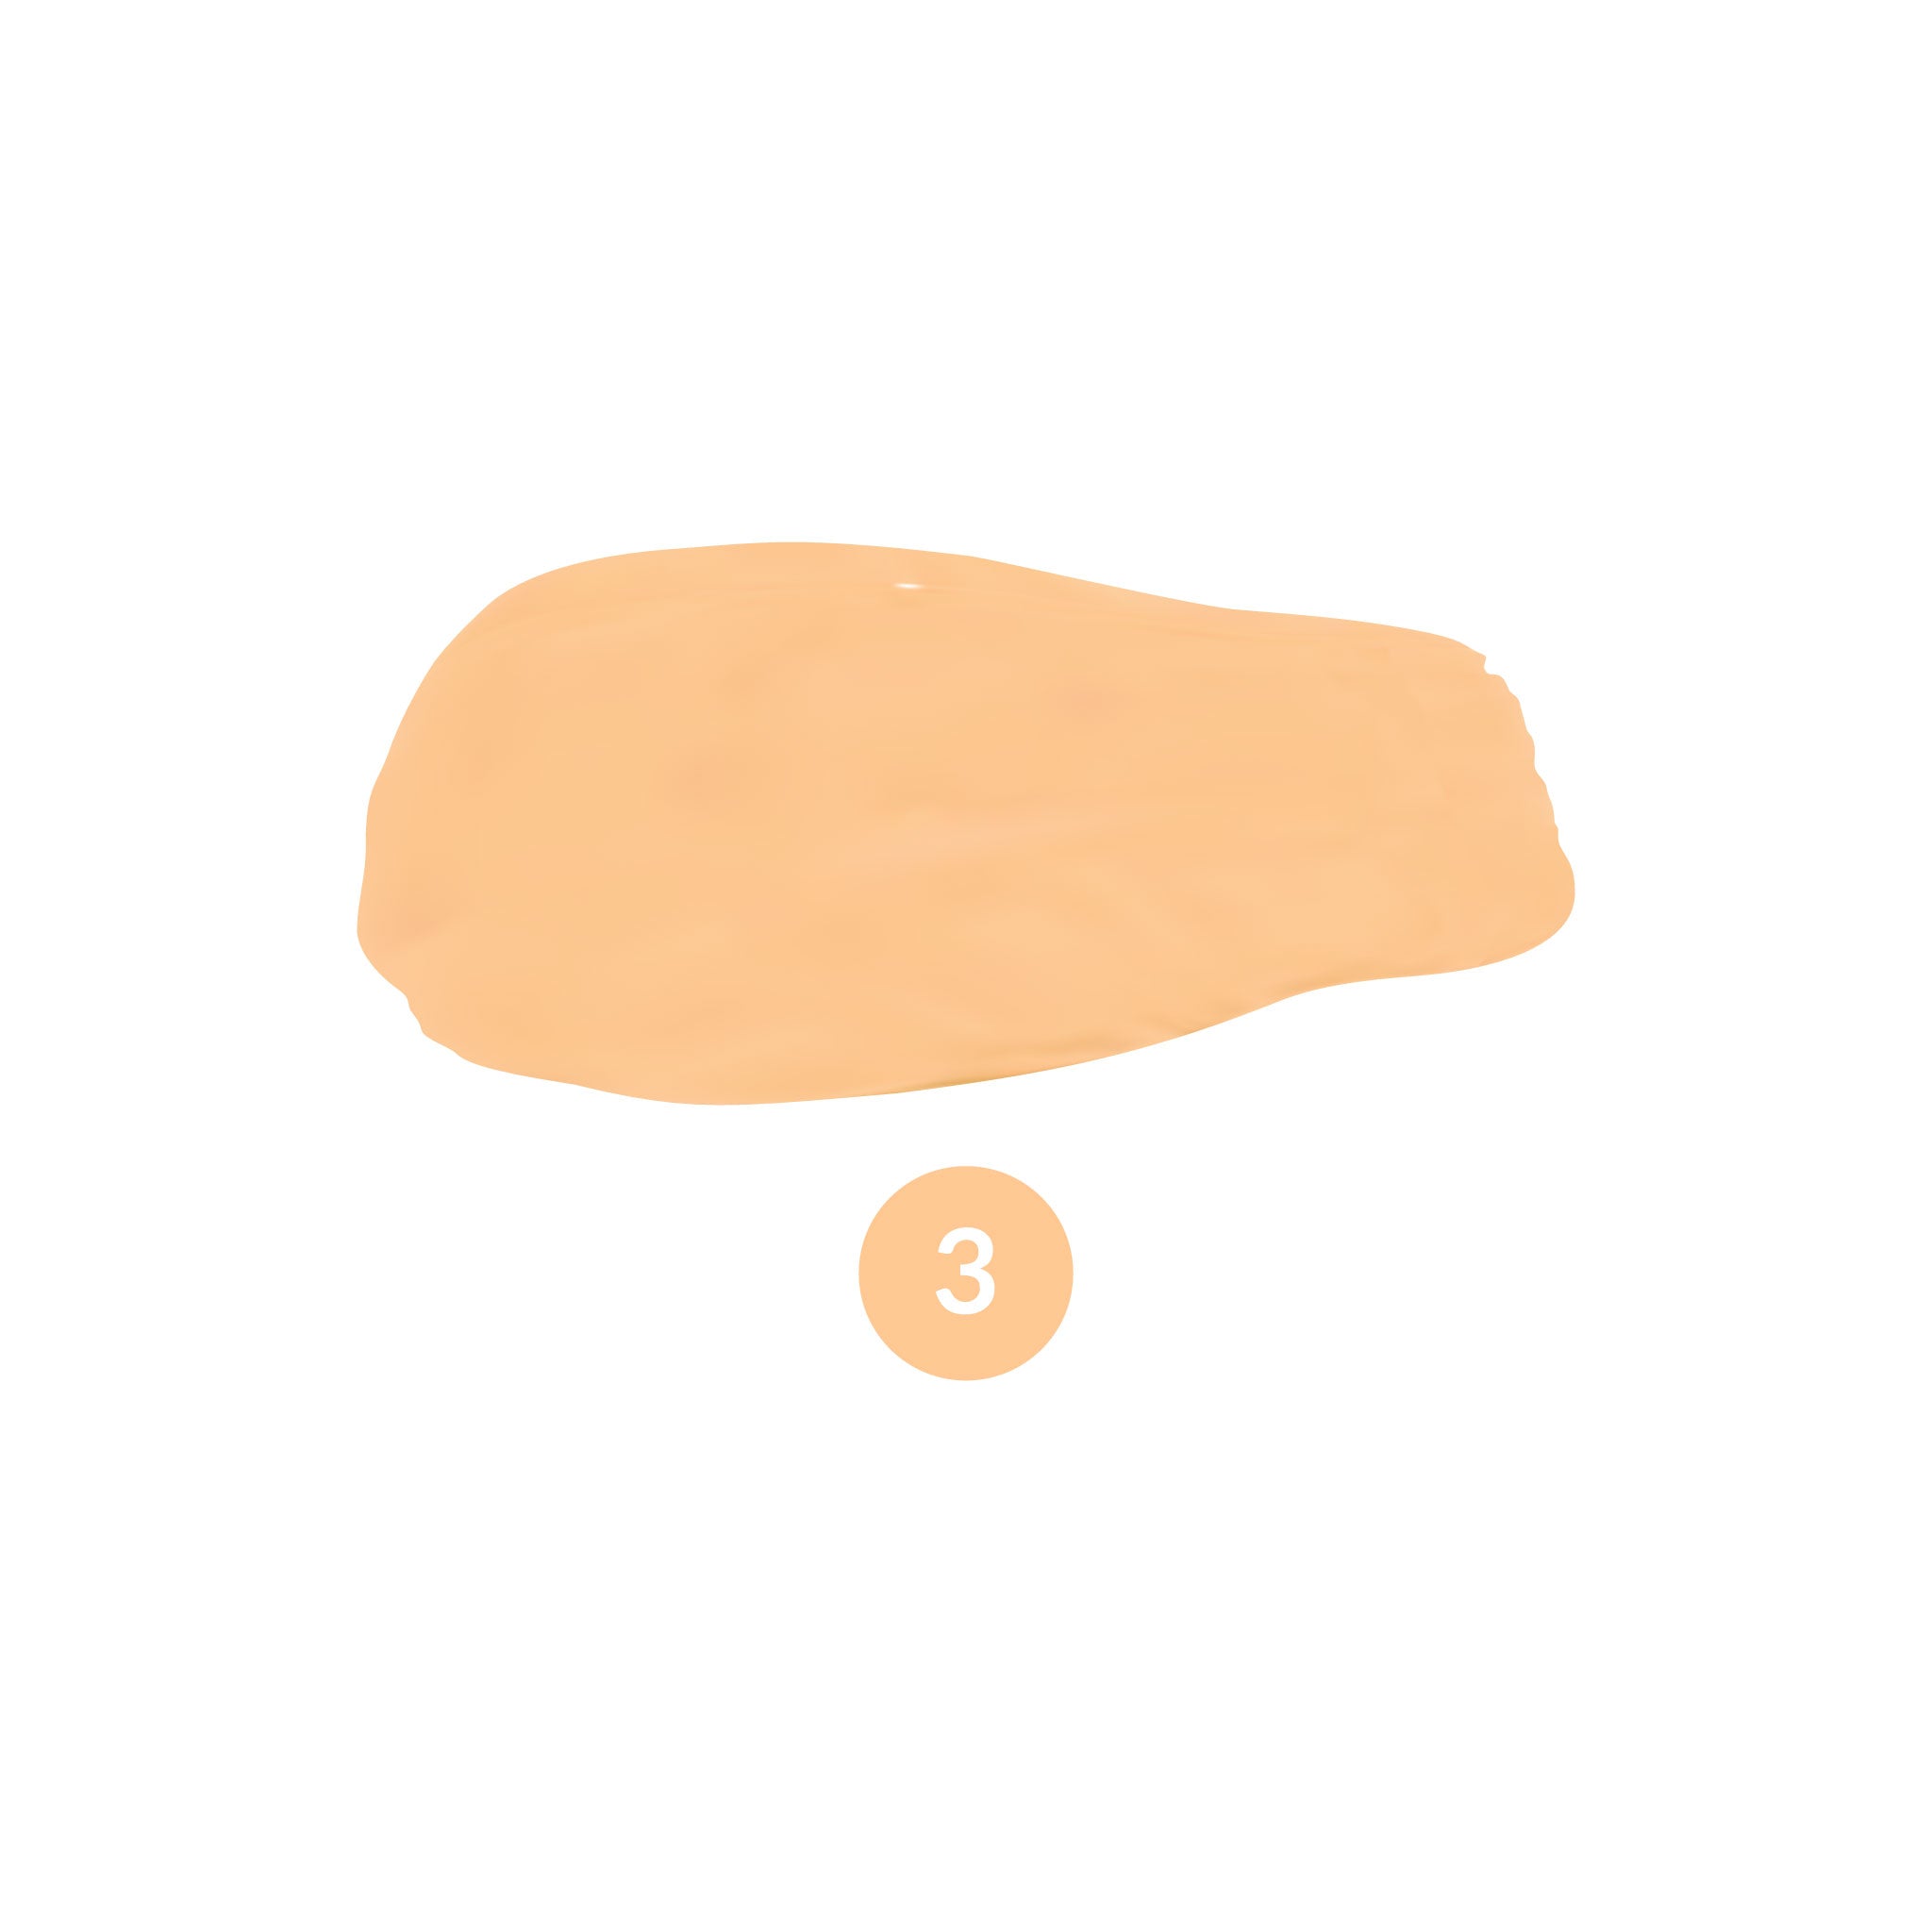 withSimplicity Liquid Foundation Swatch Shade 3